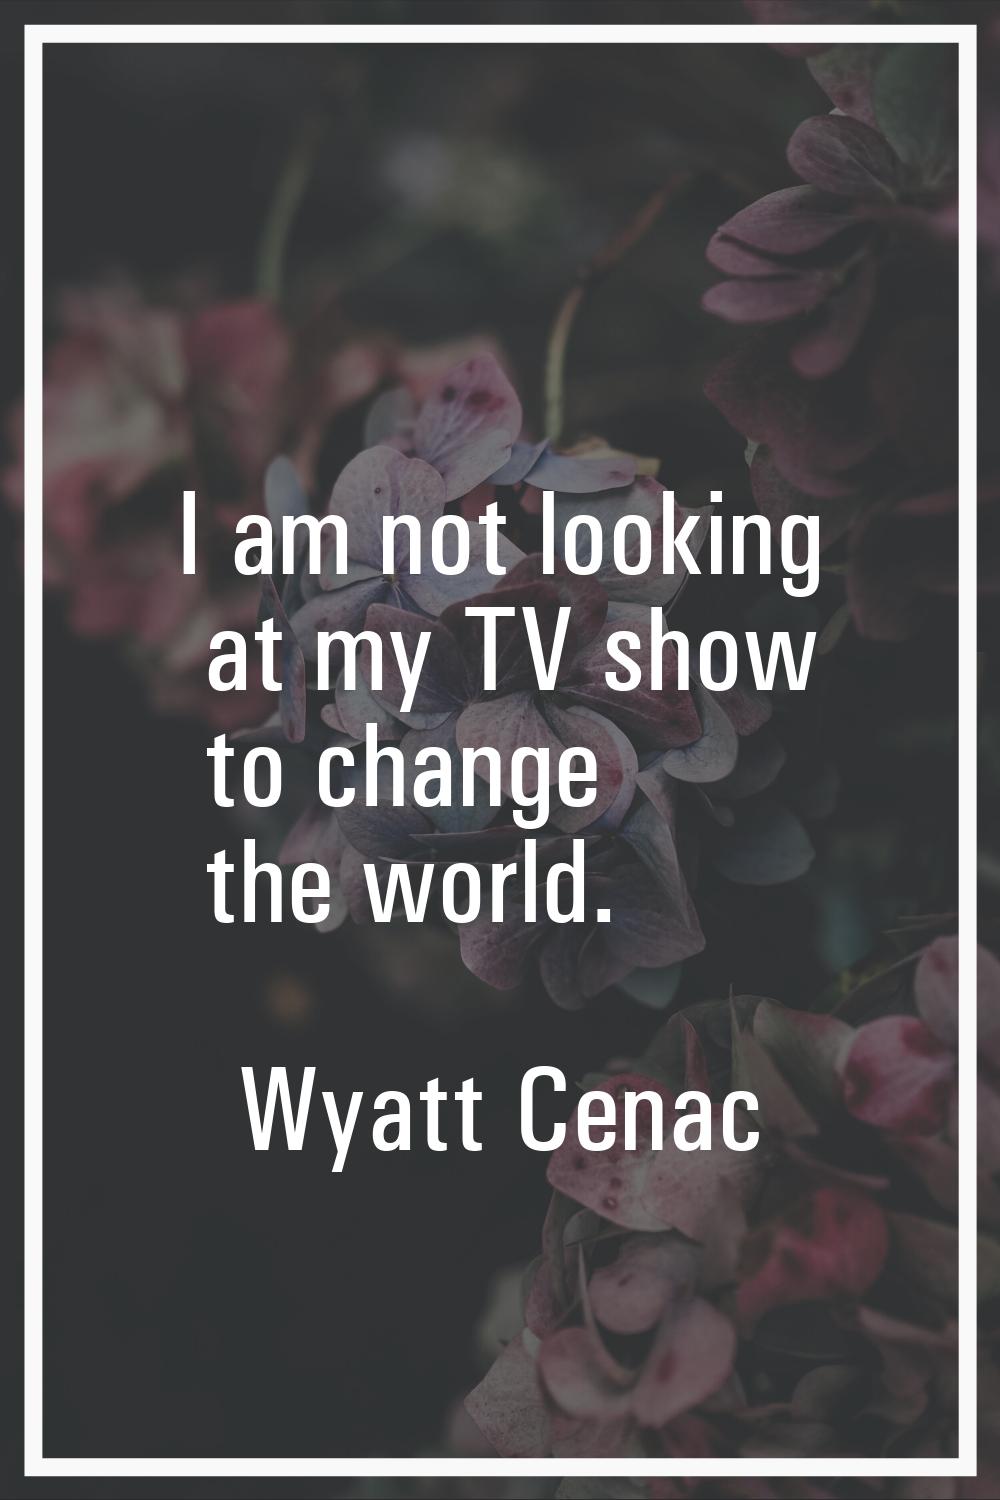 I am not looking at my TV show to change the world.